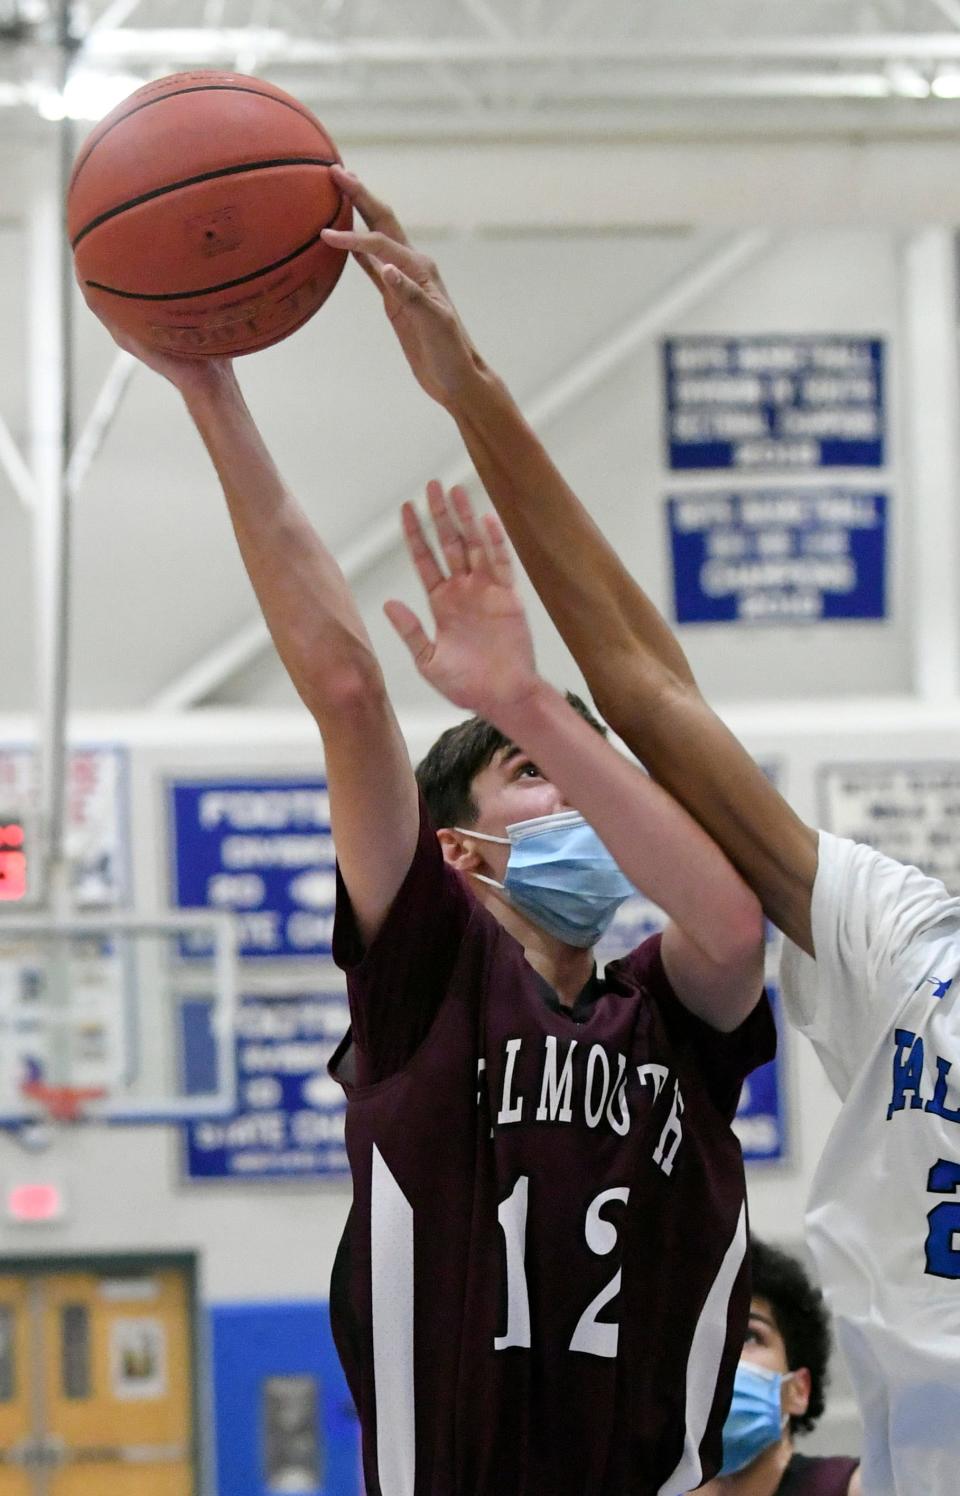 Jack Watson of Falmouth has his shot blocked by Dantae Clarke of Mashpee in this December 2021 photo.